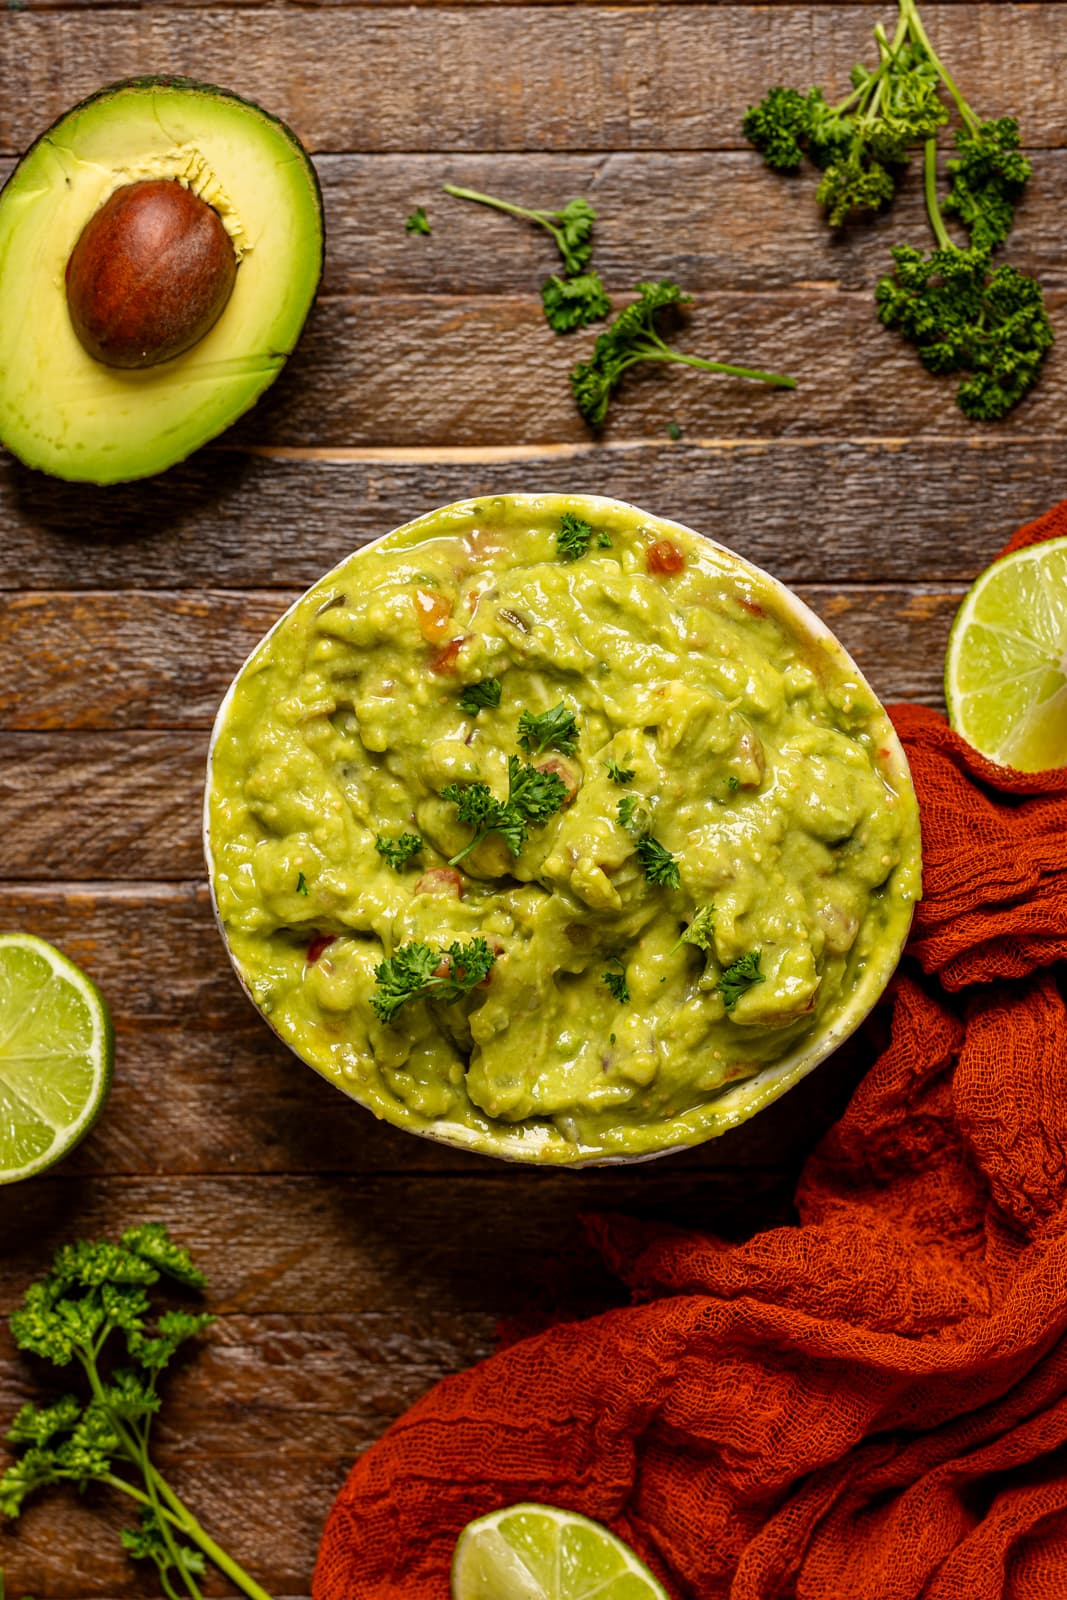 A bowl of guacamole on a brown wood table with limes and avocado.